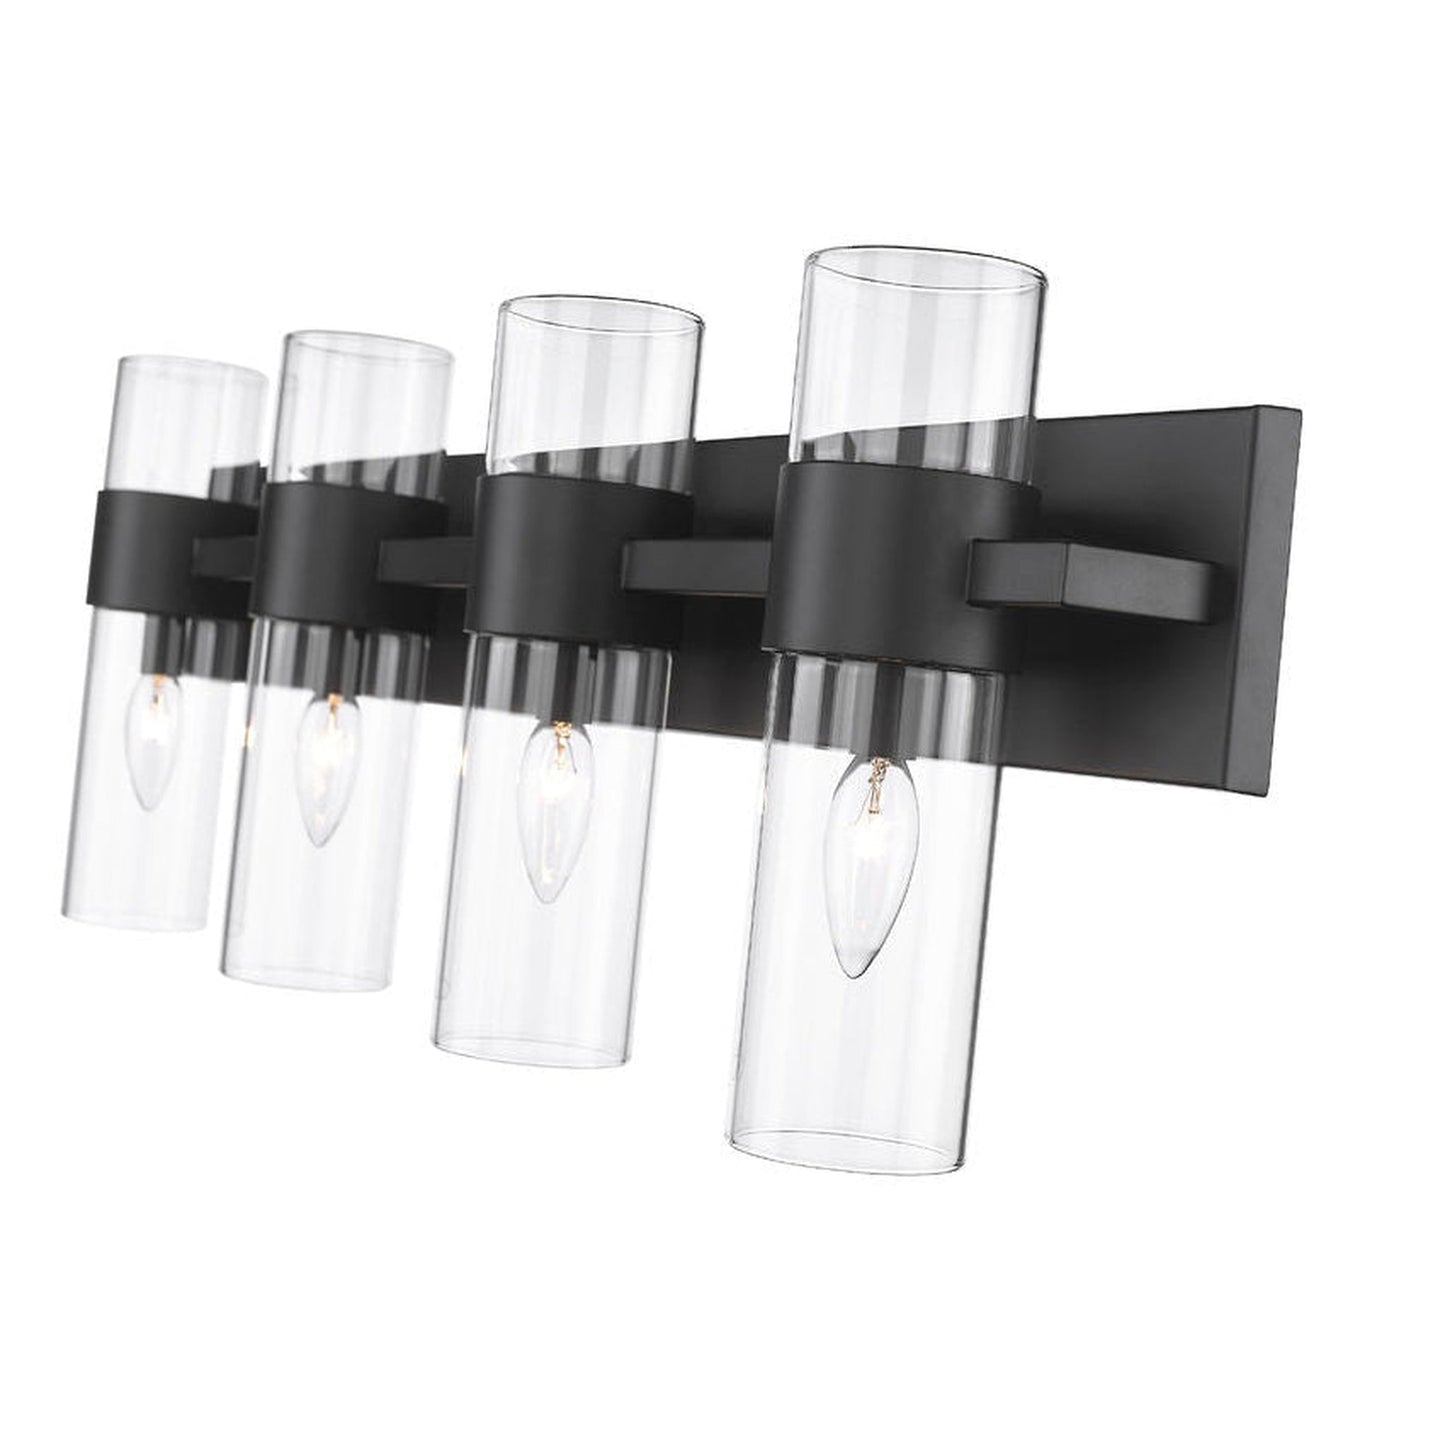 Z-Lite Lawson 32" 4-Light Matte Black Vanity Light With Clear Glass Shade